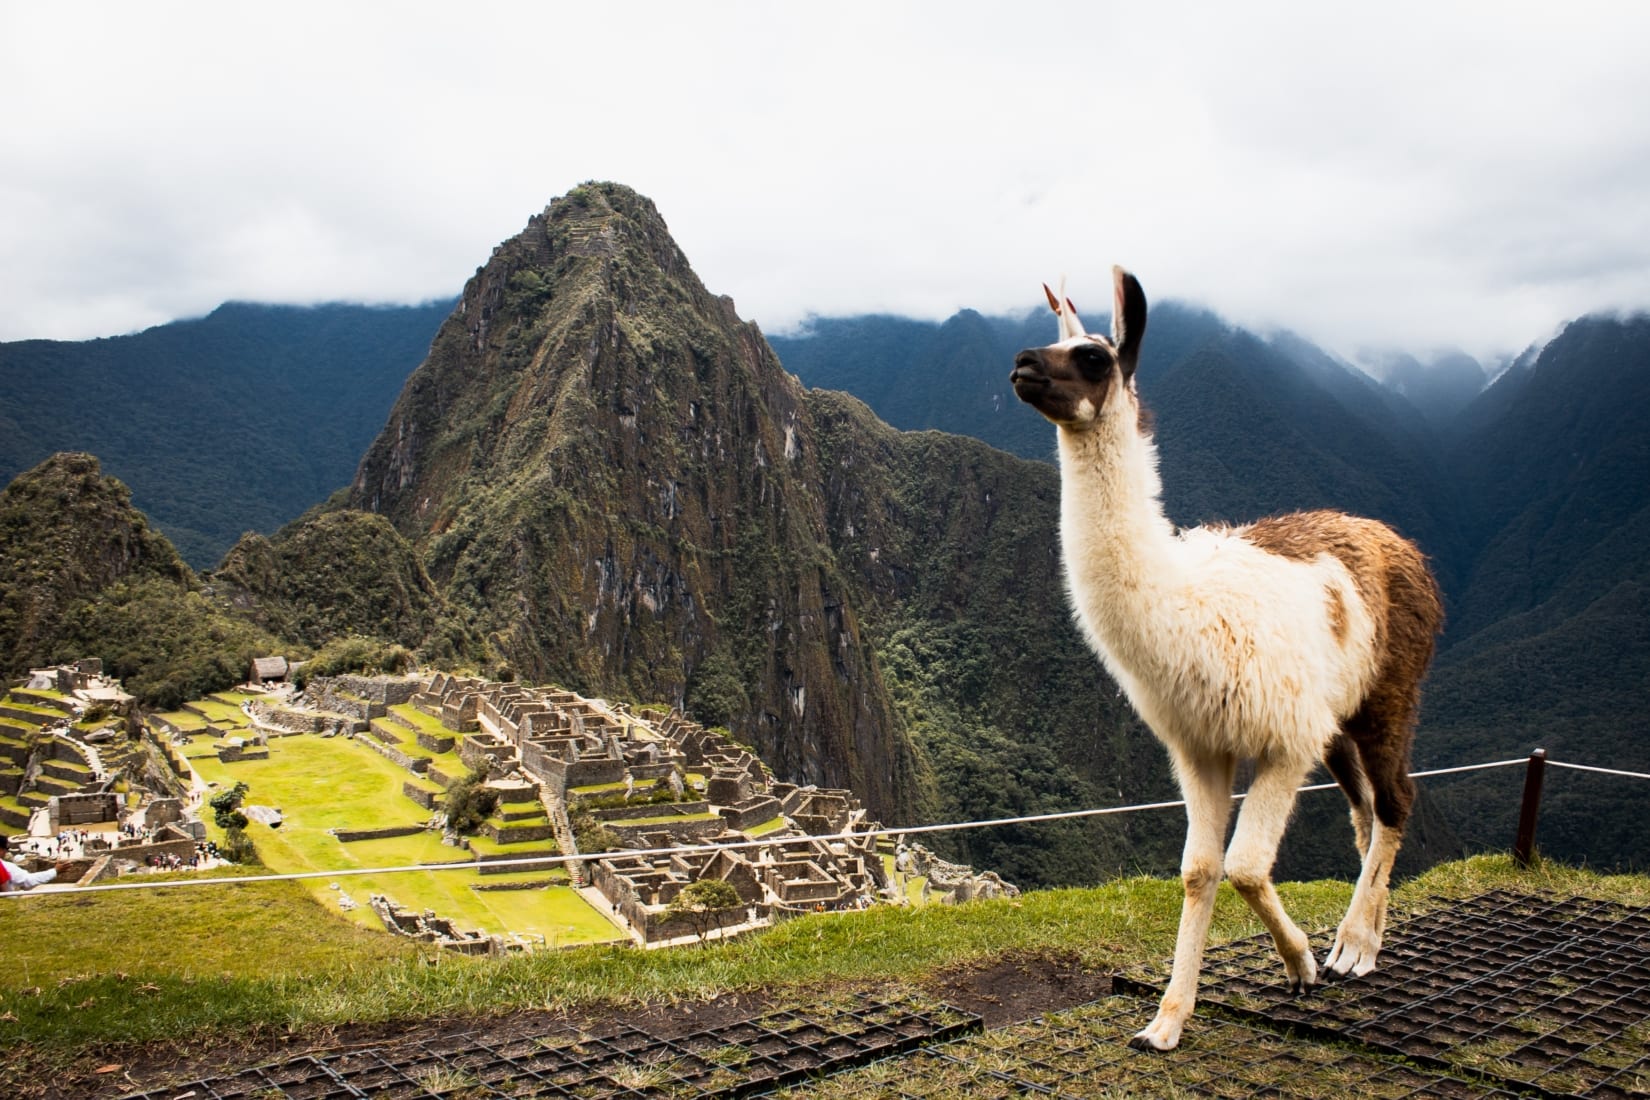 A photograph of a llama walking on a hill above Machu Picchu, with the citadel in the background